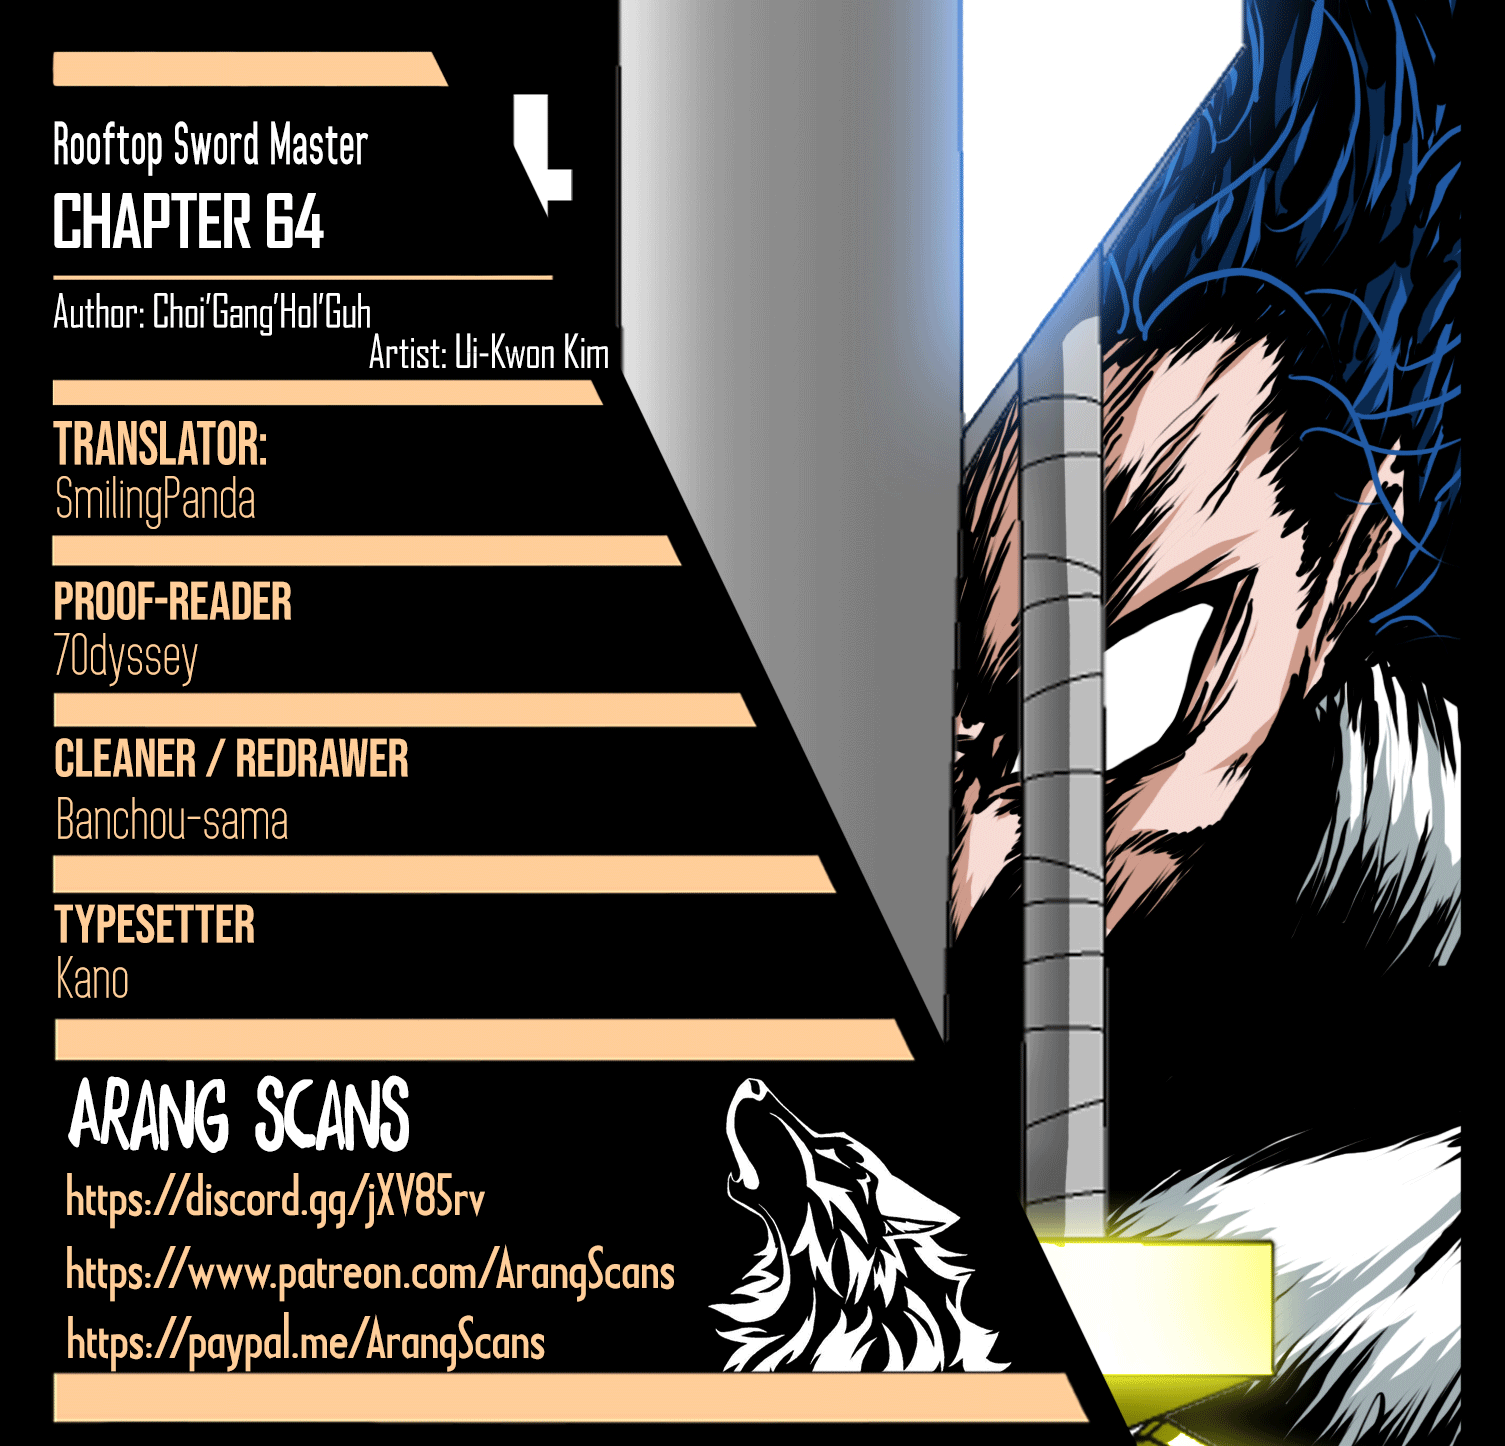 Rooftop Sword Master - Chapter 10631 - Image 1